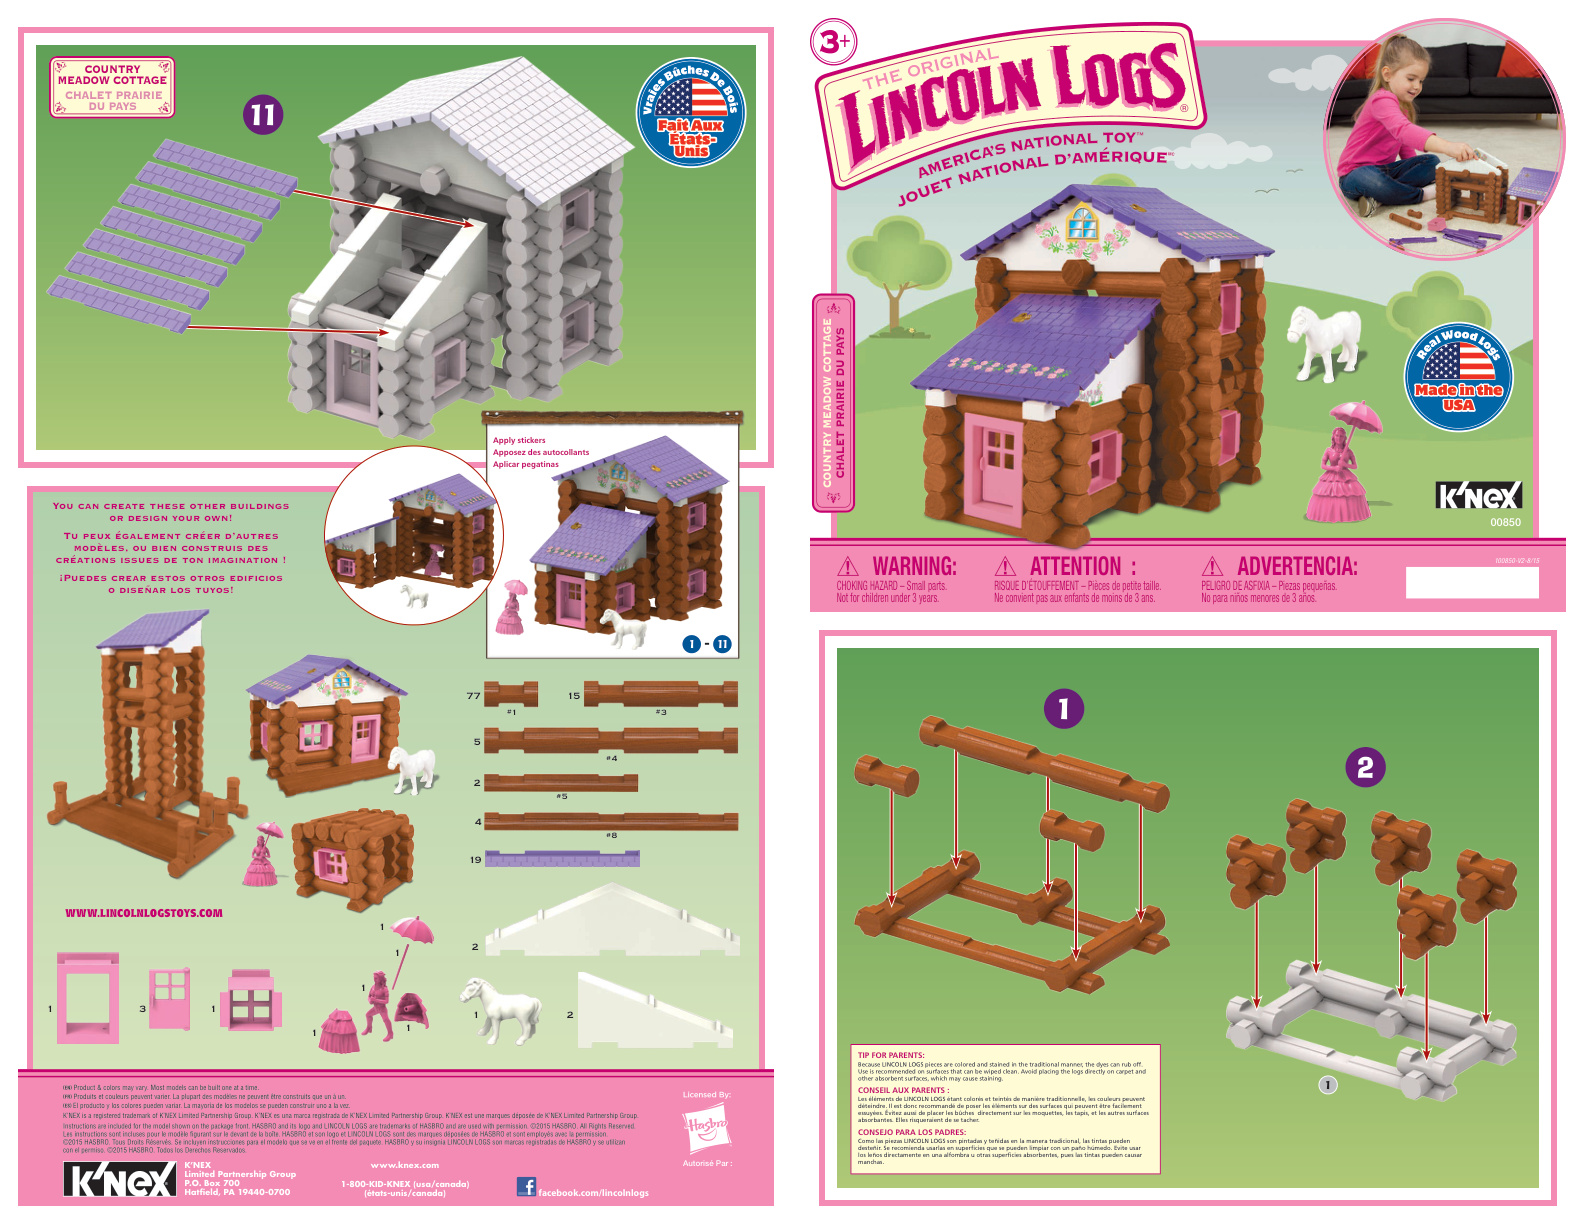 Lincoln Logs Country Meadow Cottage 00850